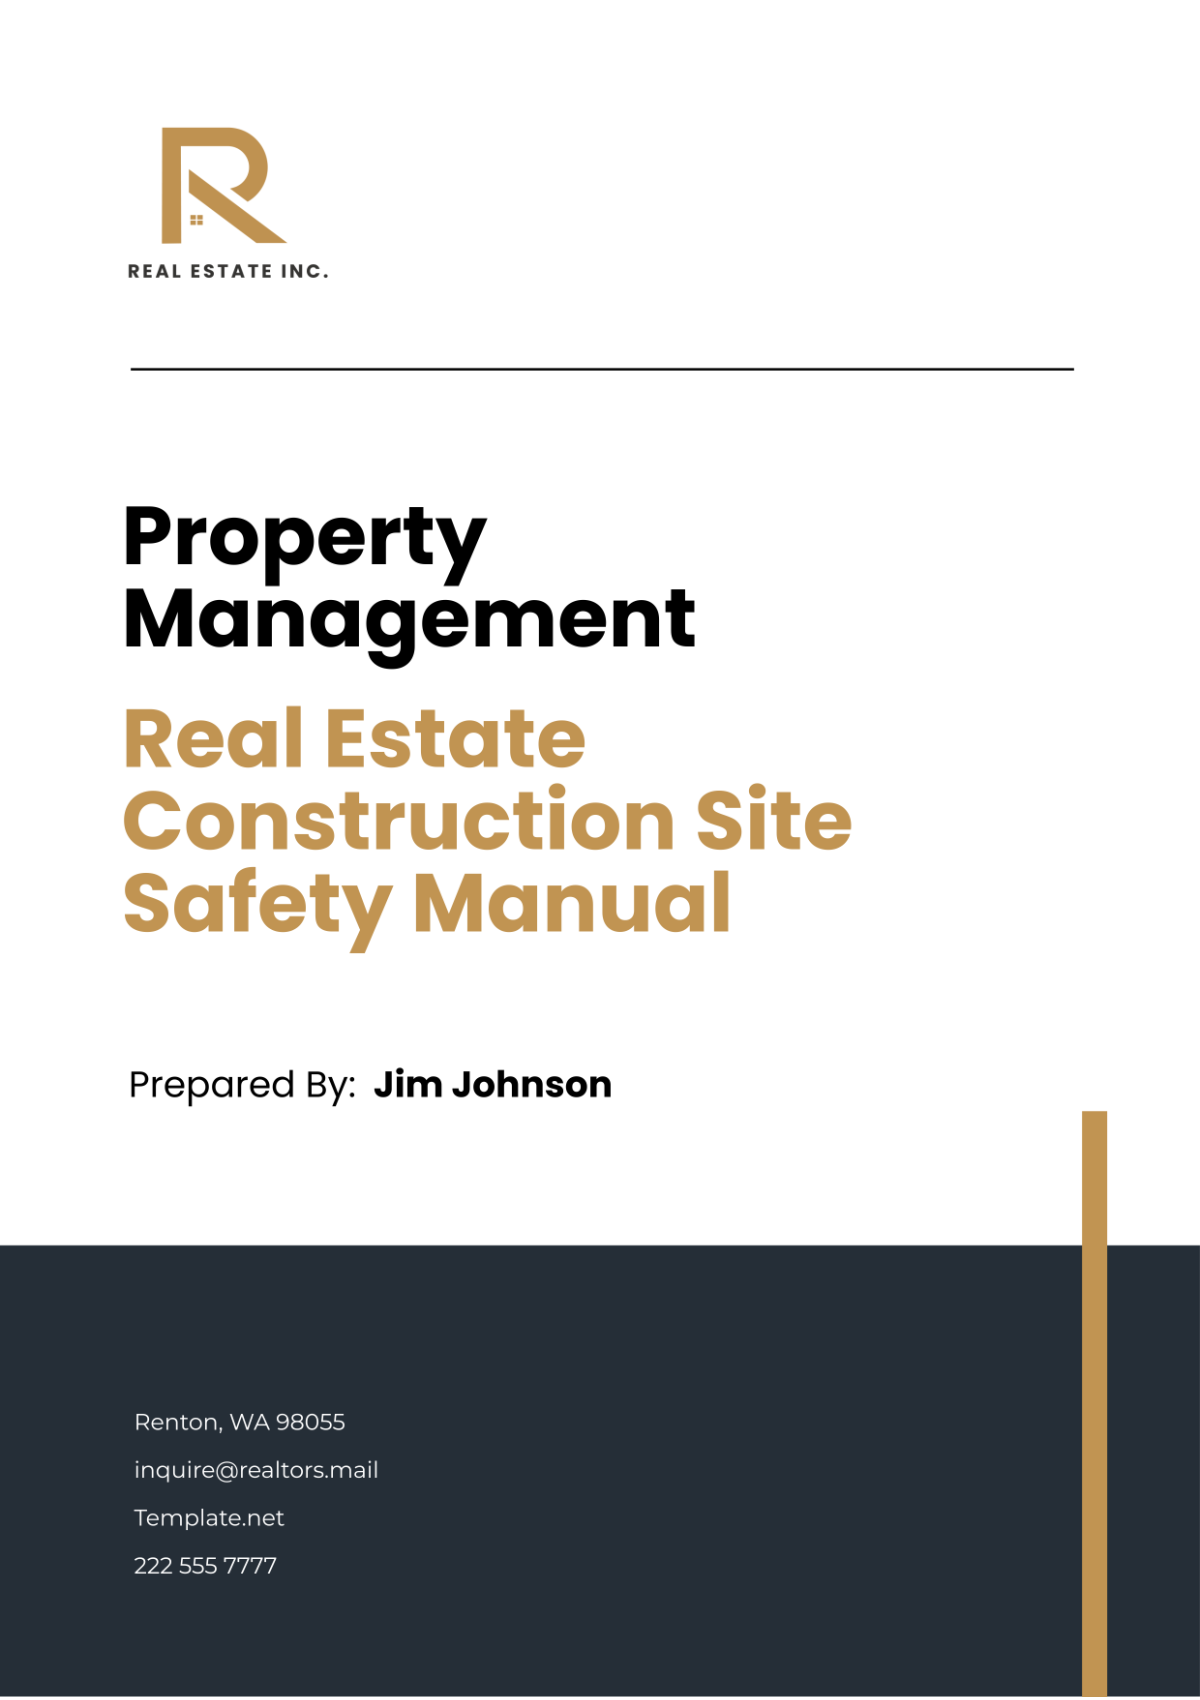 Real Estate Construction Site Safety Manual Template